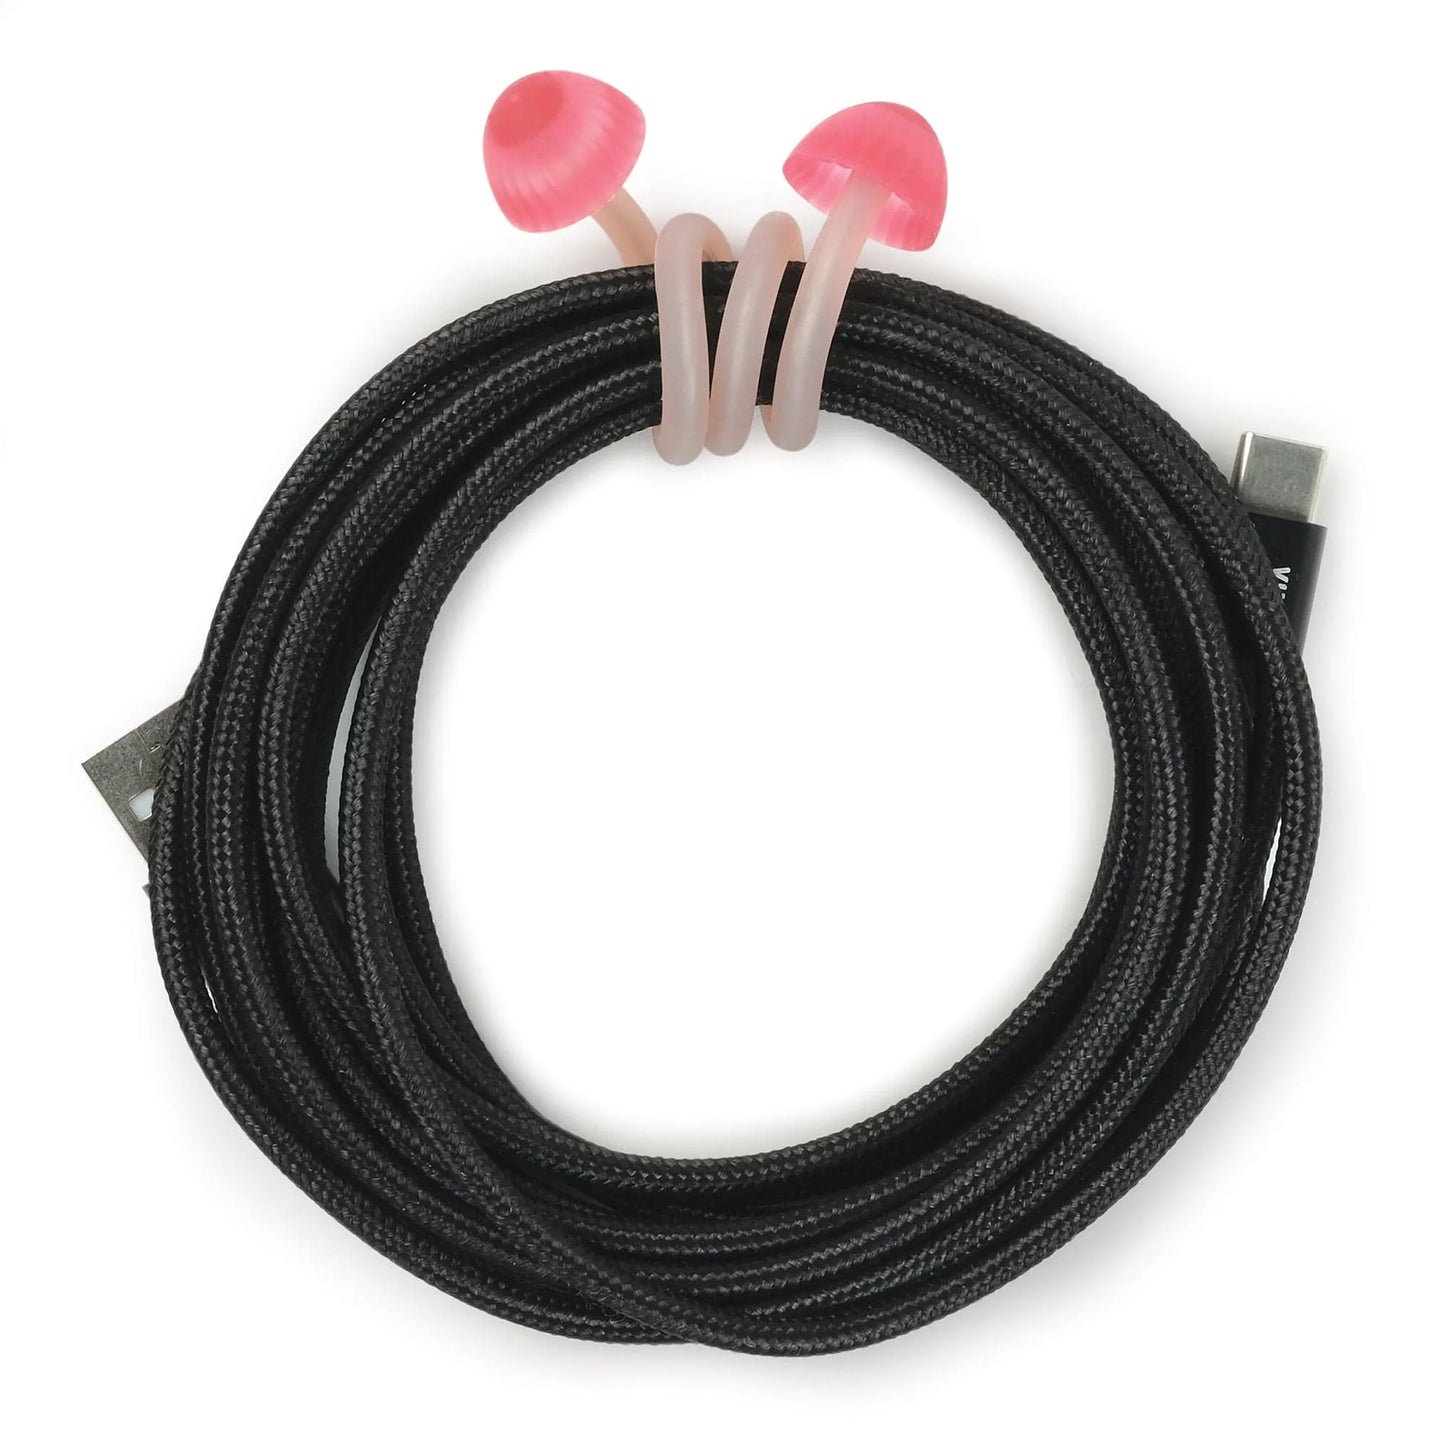 Trip Wires Cable Ties